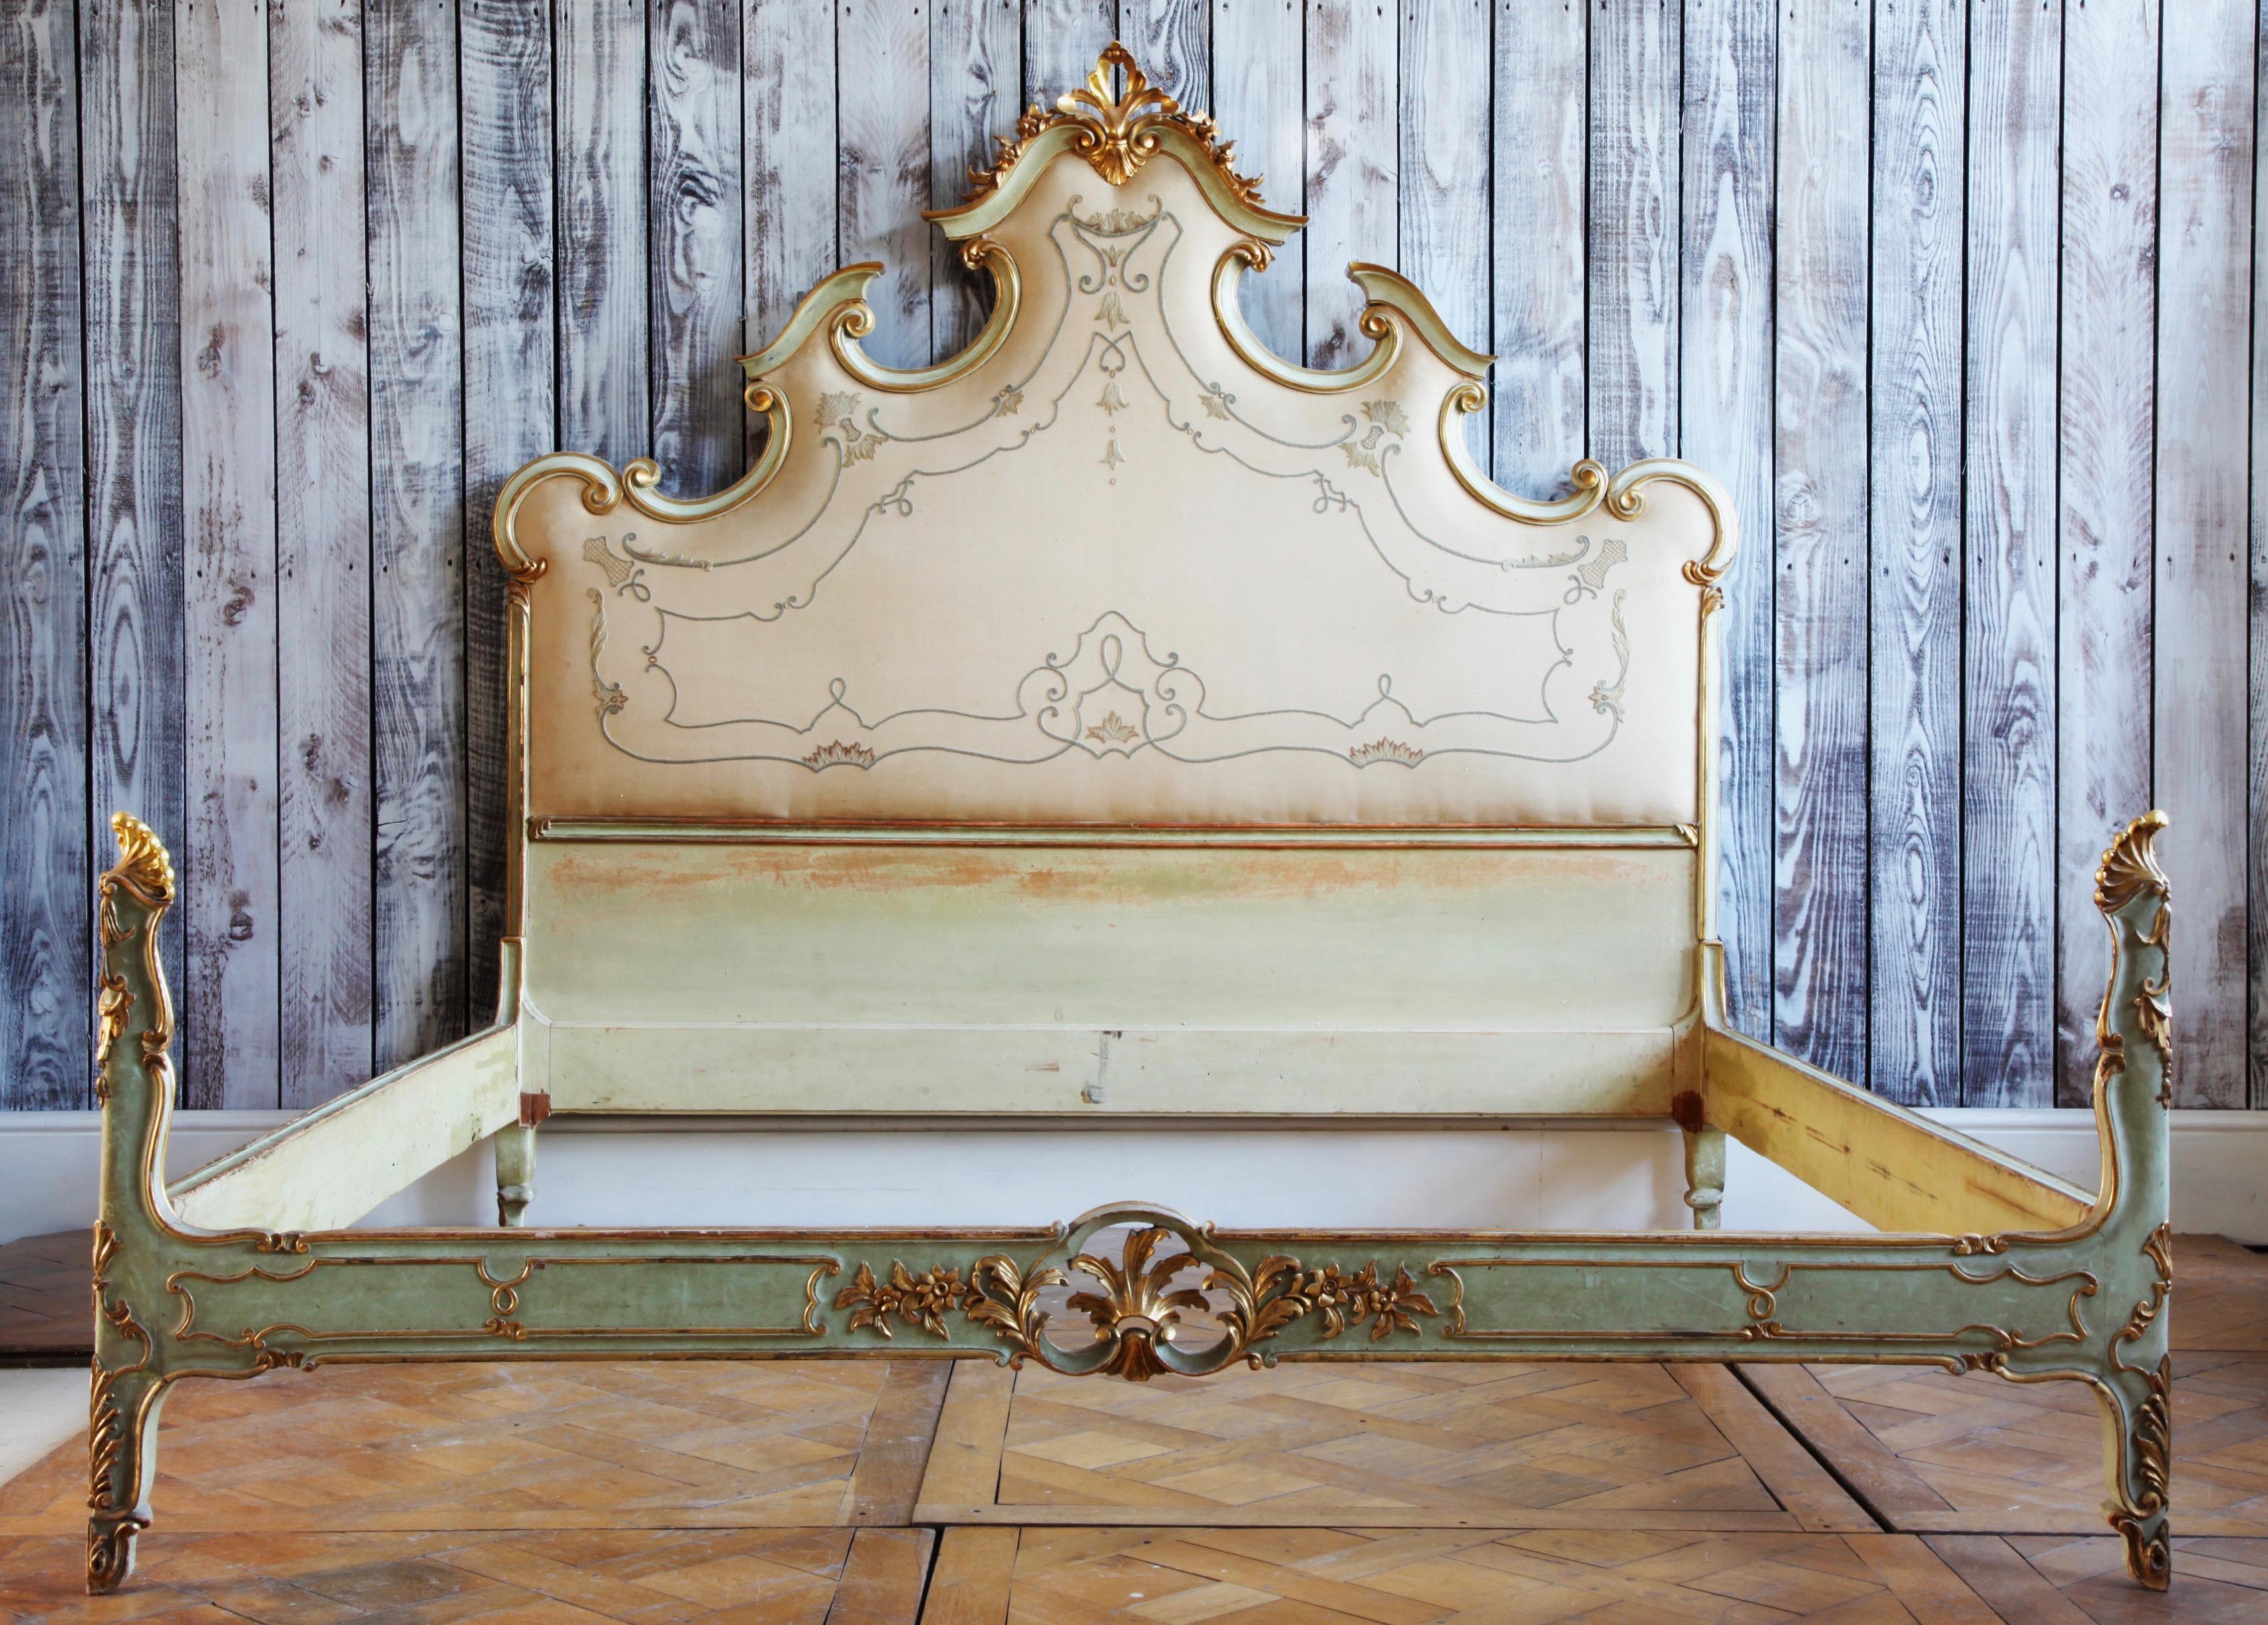 An grand sized Louis XV style  bed hand carved in wood and made in Italy, circa 1940s. The bed’s proportions of a large imposing headboard, designed with the curves and flowing lines of the Rococo style coupled with a low styled footboard make for a